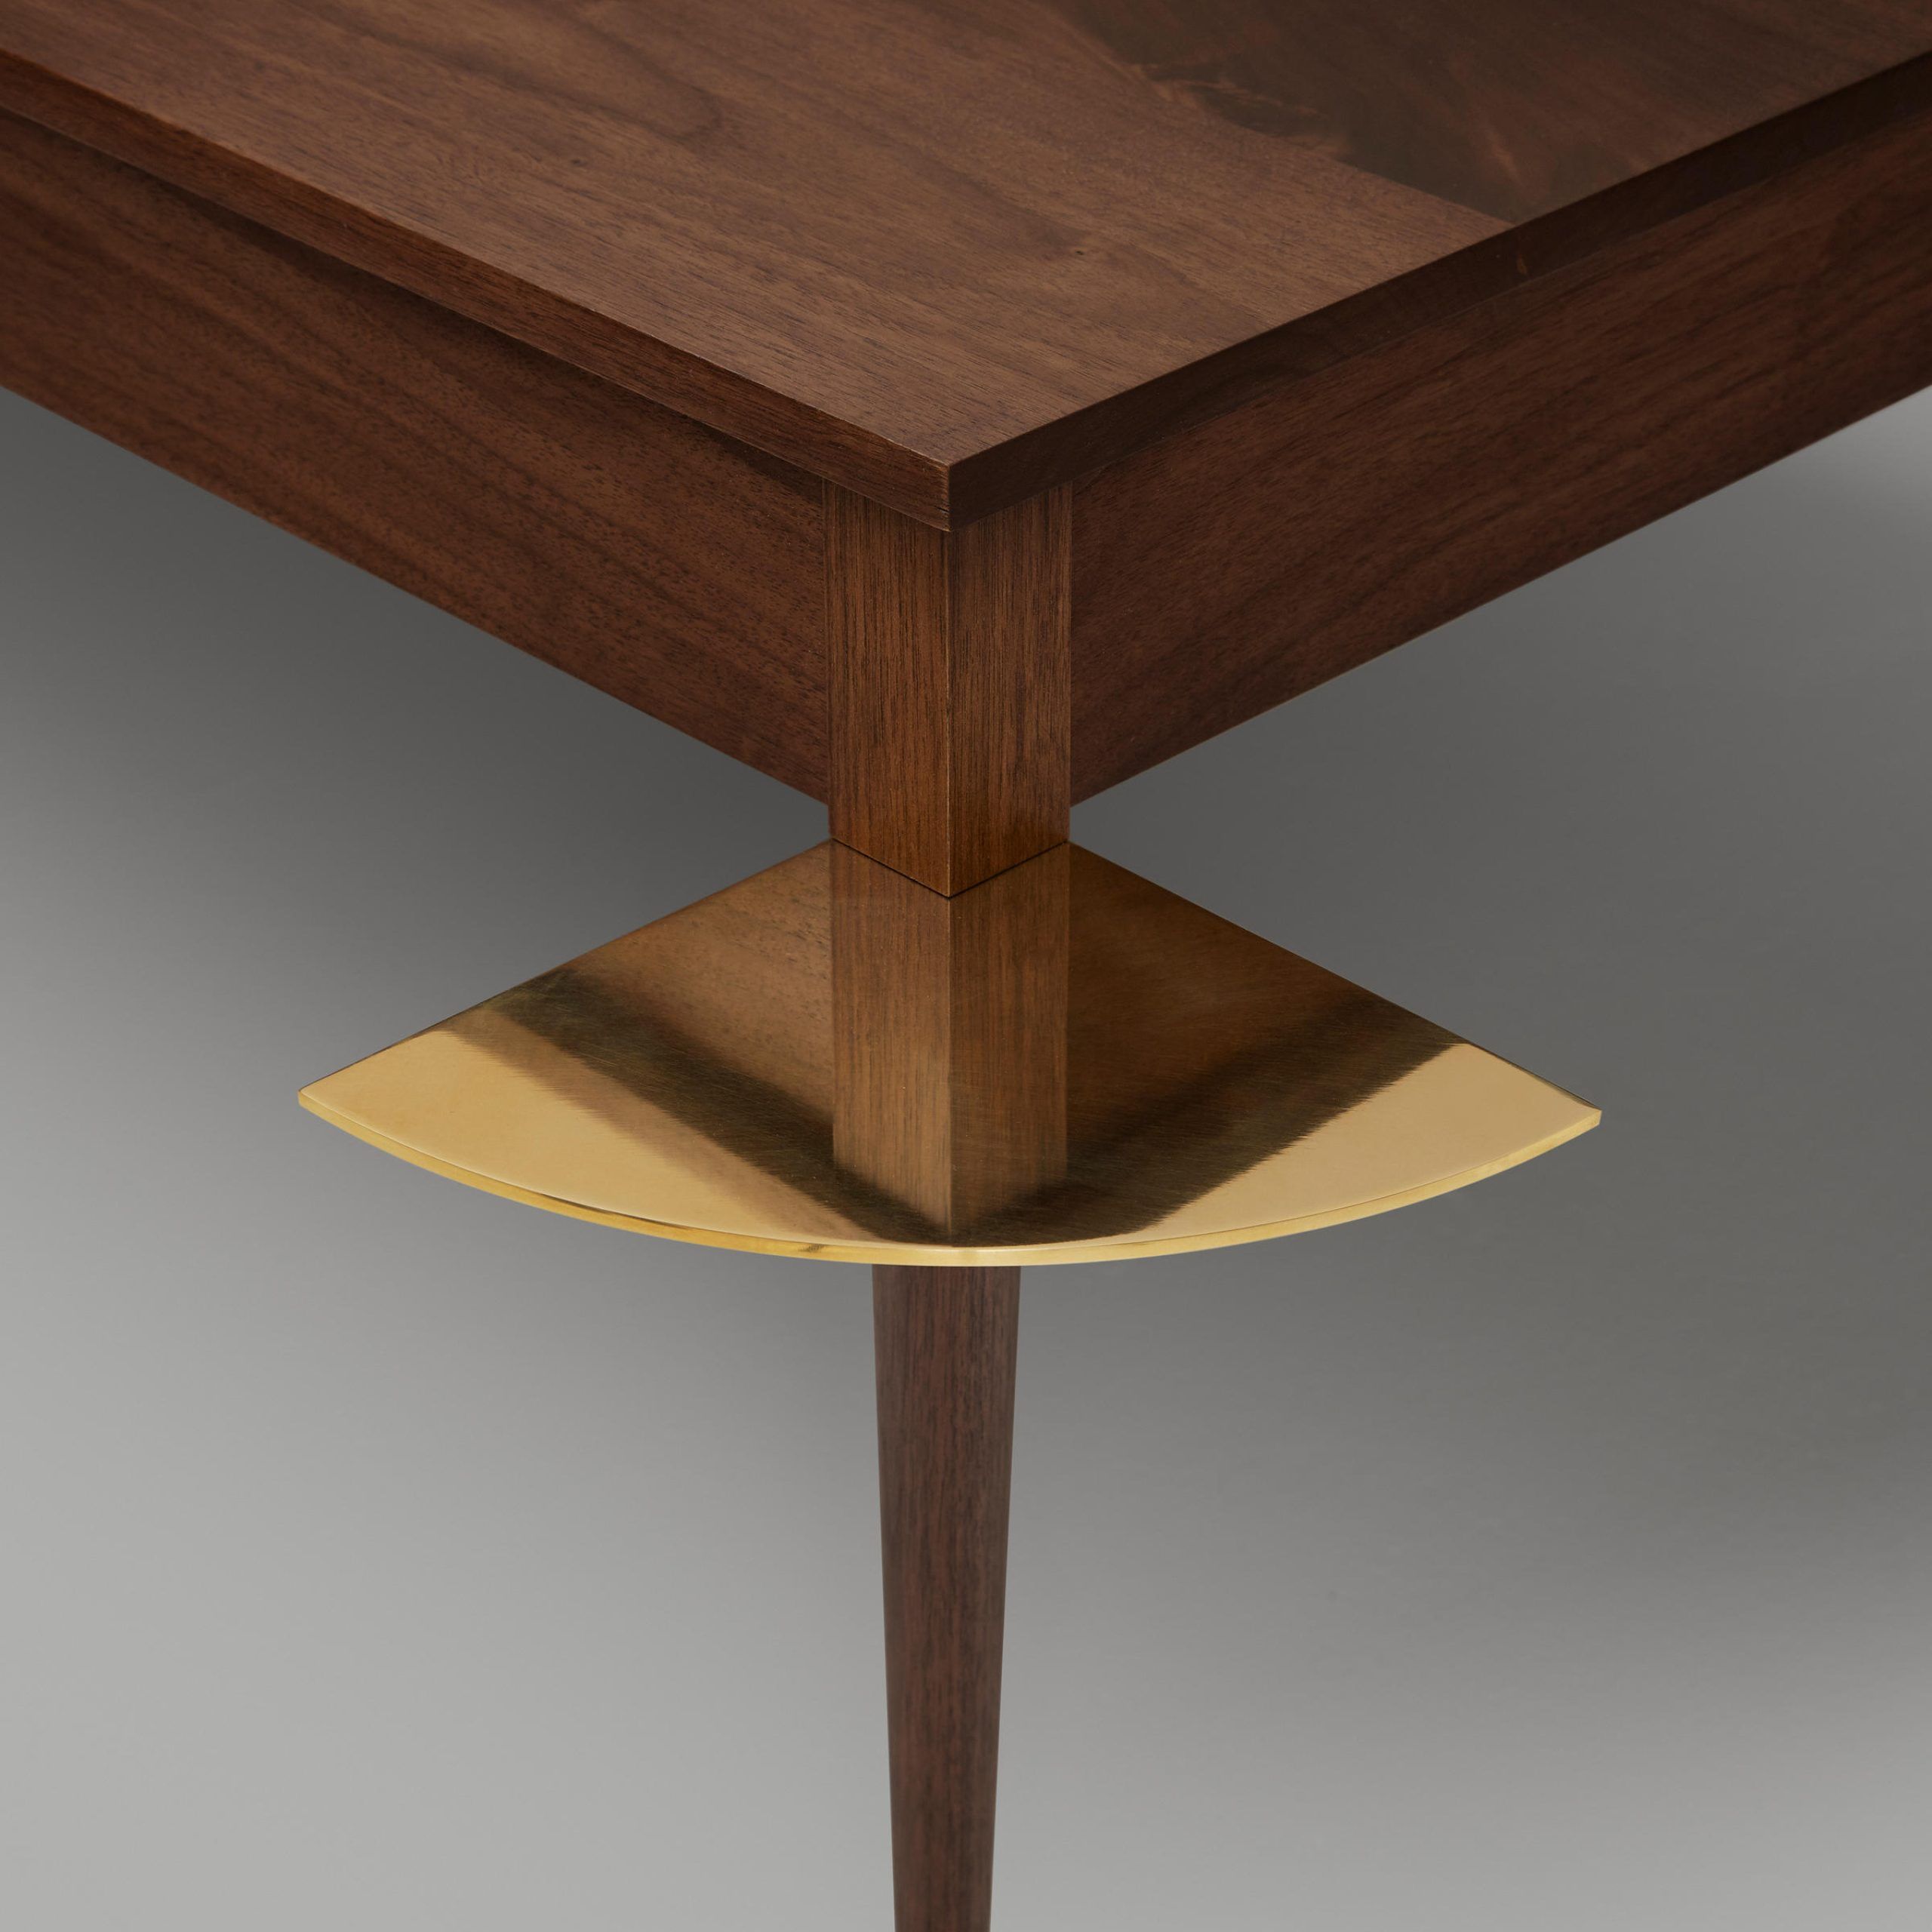 The Cain Coffee Table (black Walnut) | Architonic With Regard To Regency Cain Steel Coffee Tables (View 9 of 20)